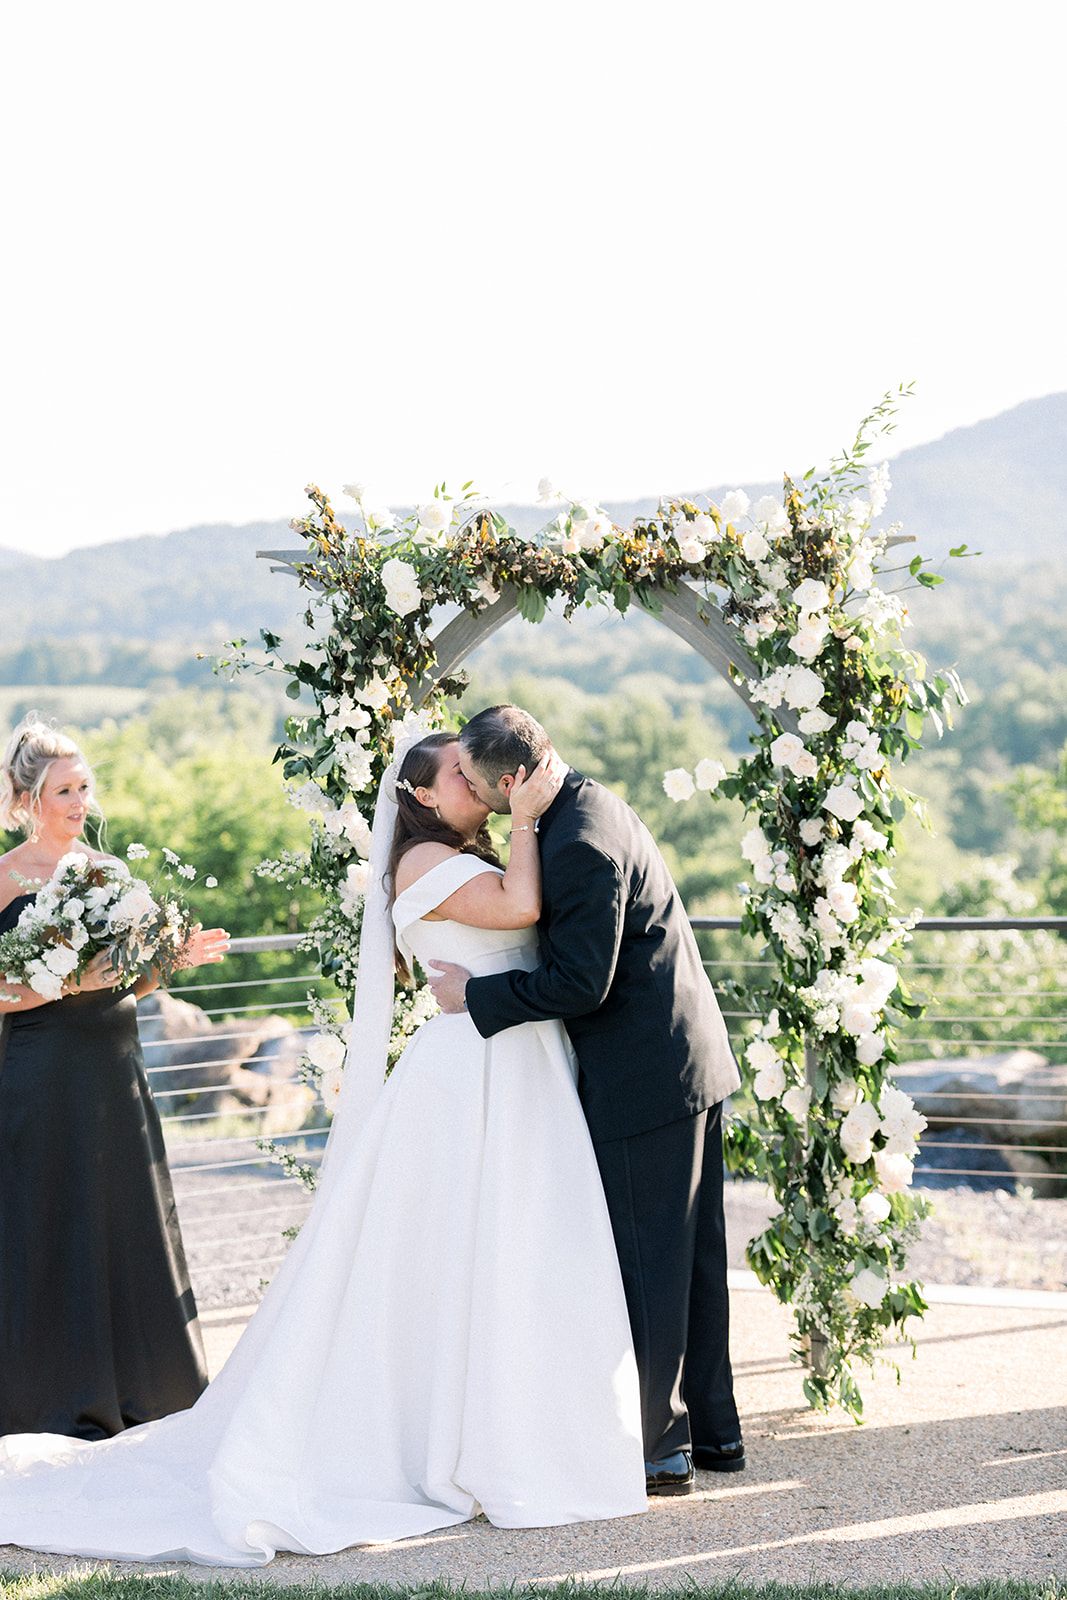 Monger/Hikmat Wedding Submission Gallery